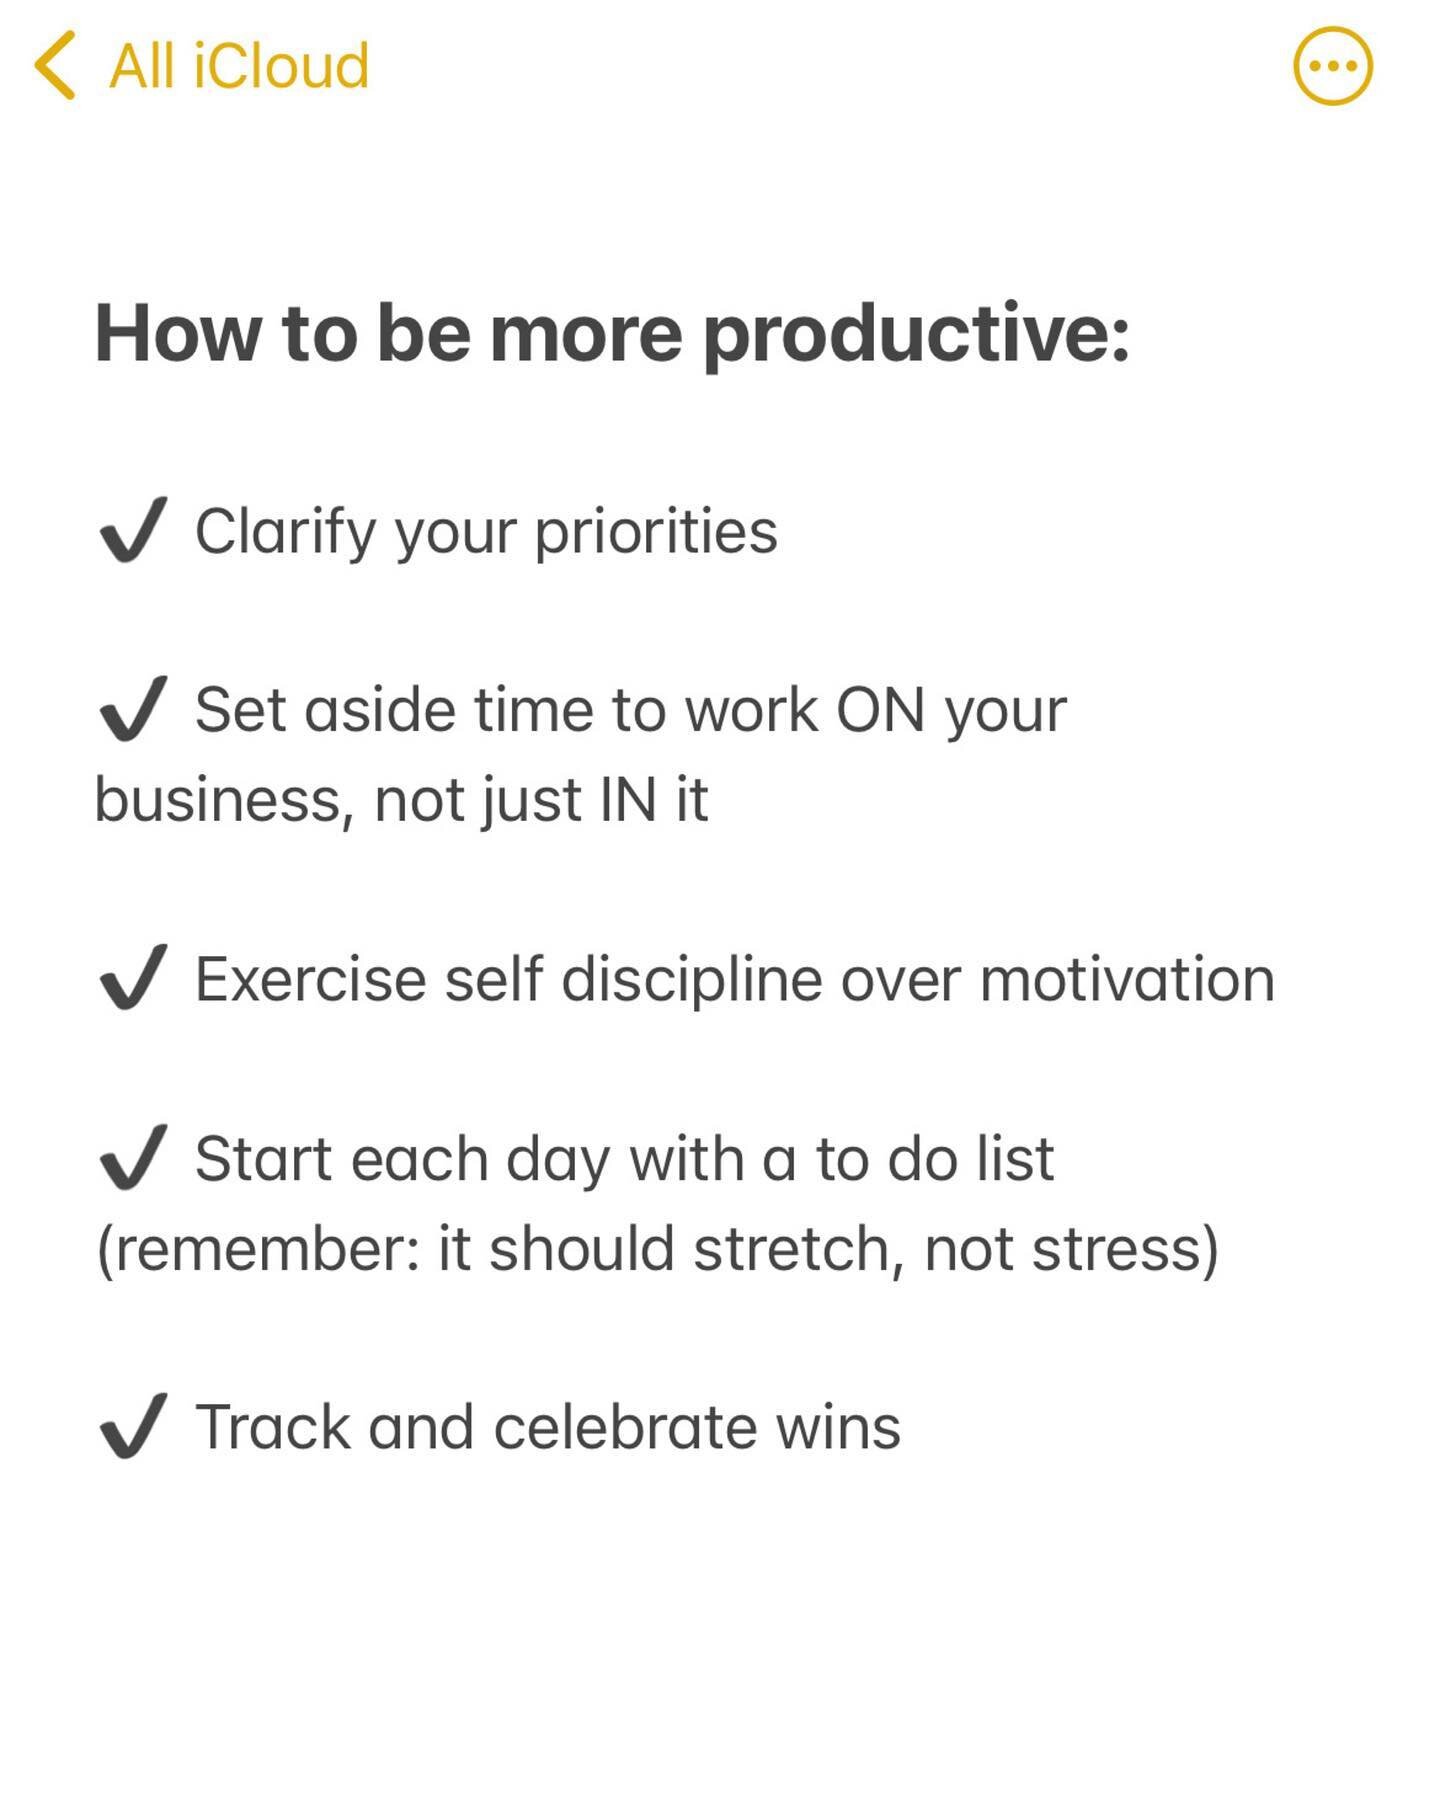 POV: you took part in The Productivity Bootcamp and remembered how impactful the basics are🤯

Consistent action is KEY to business growth so finding the tools that help you show up makes such a difference. Swipe to see proof of that🔥

If you took p